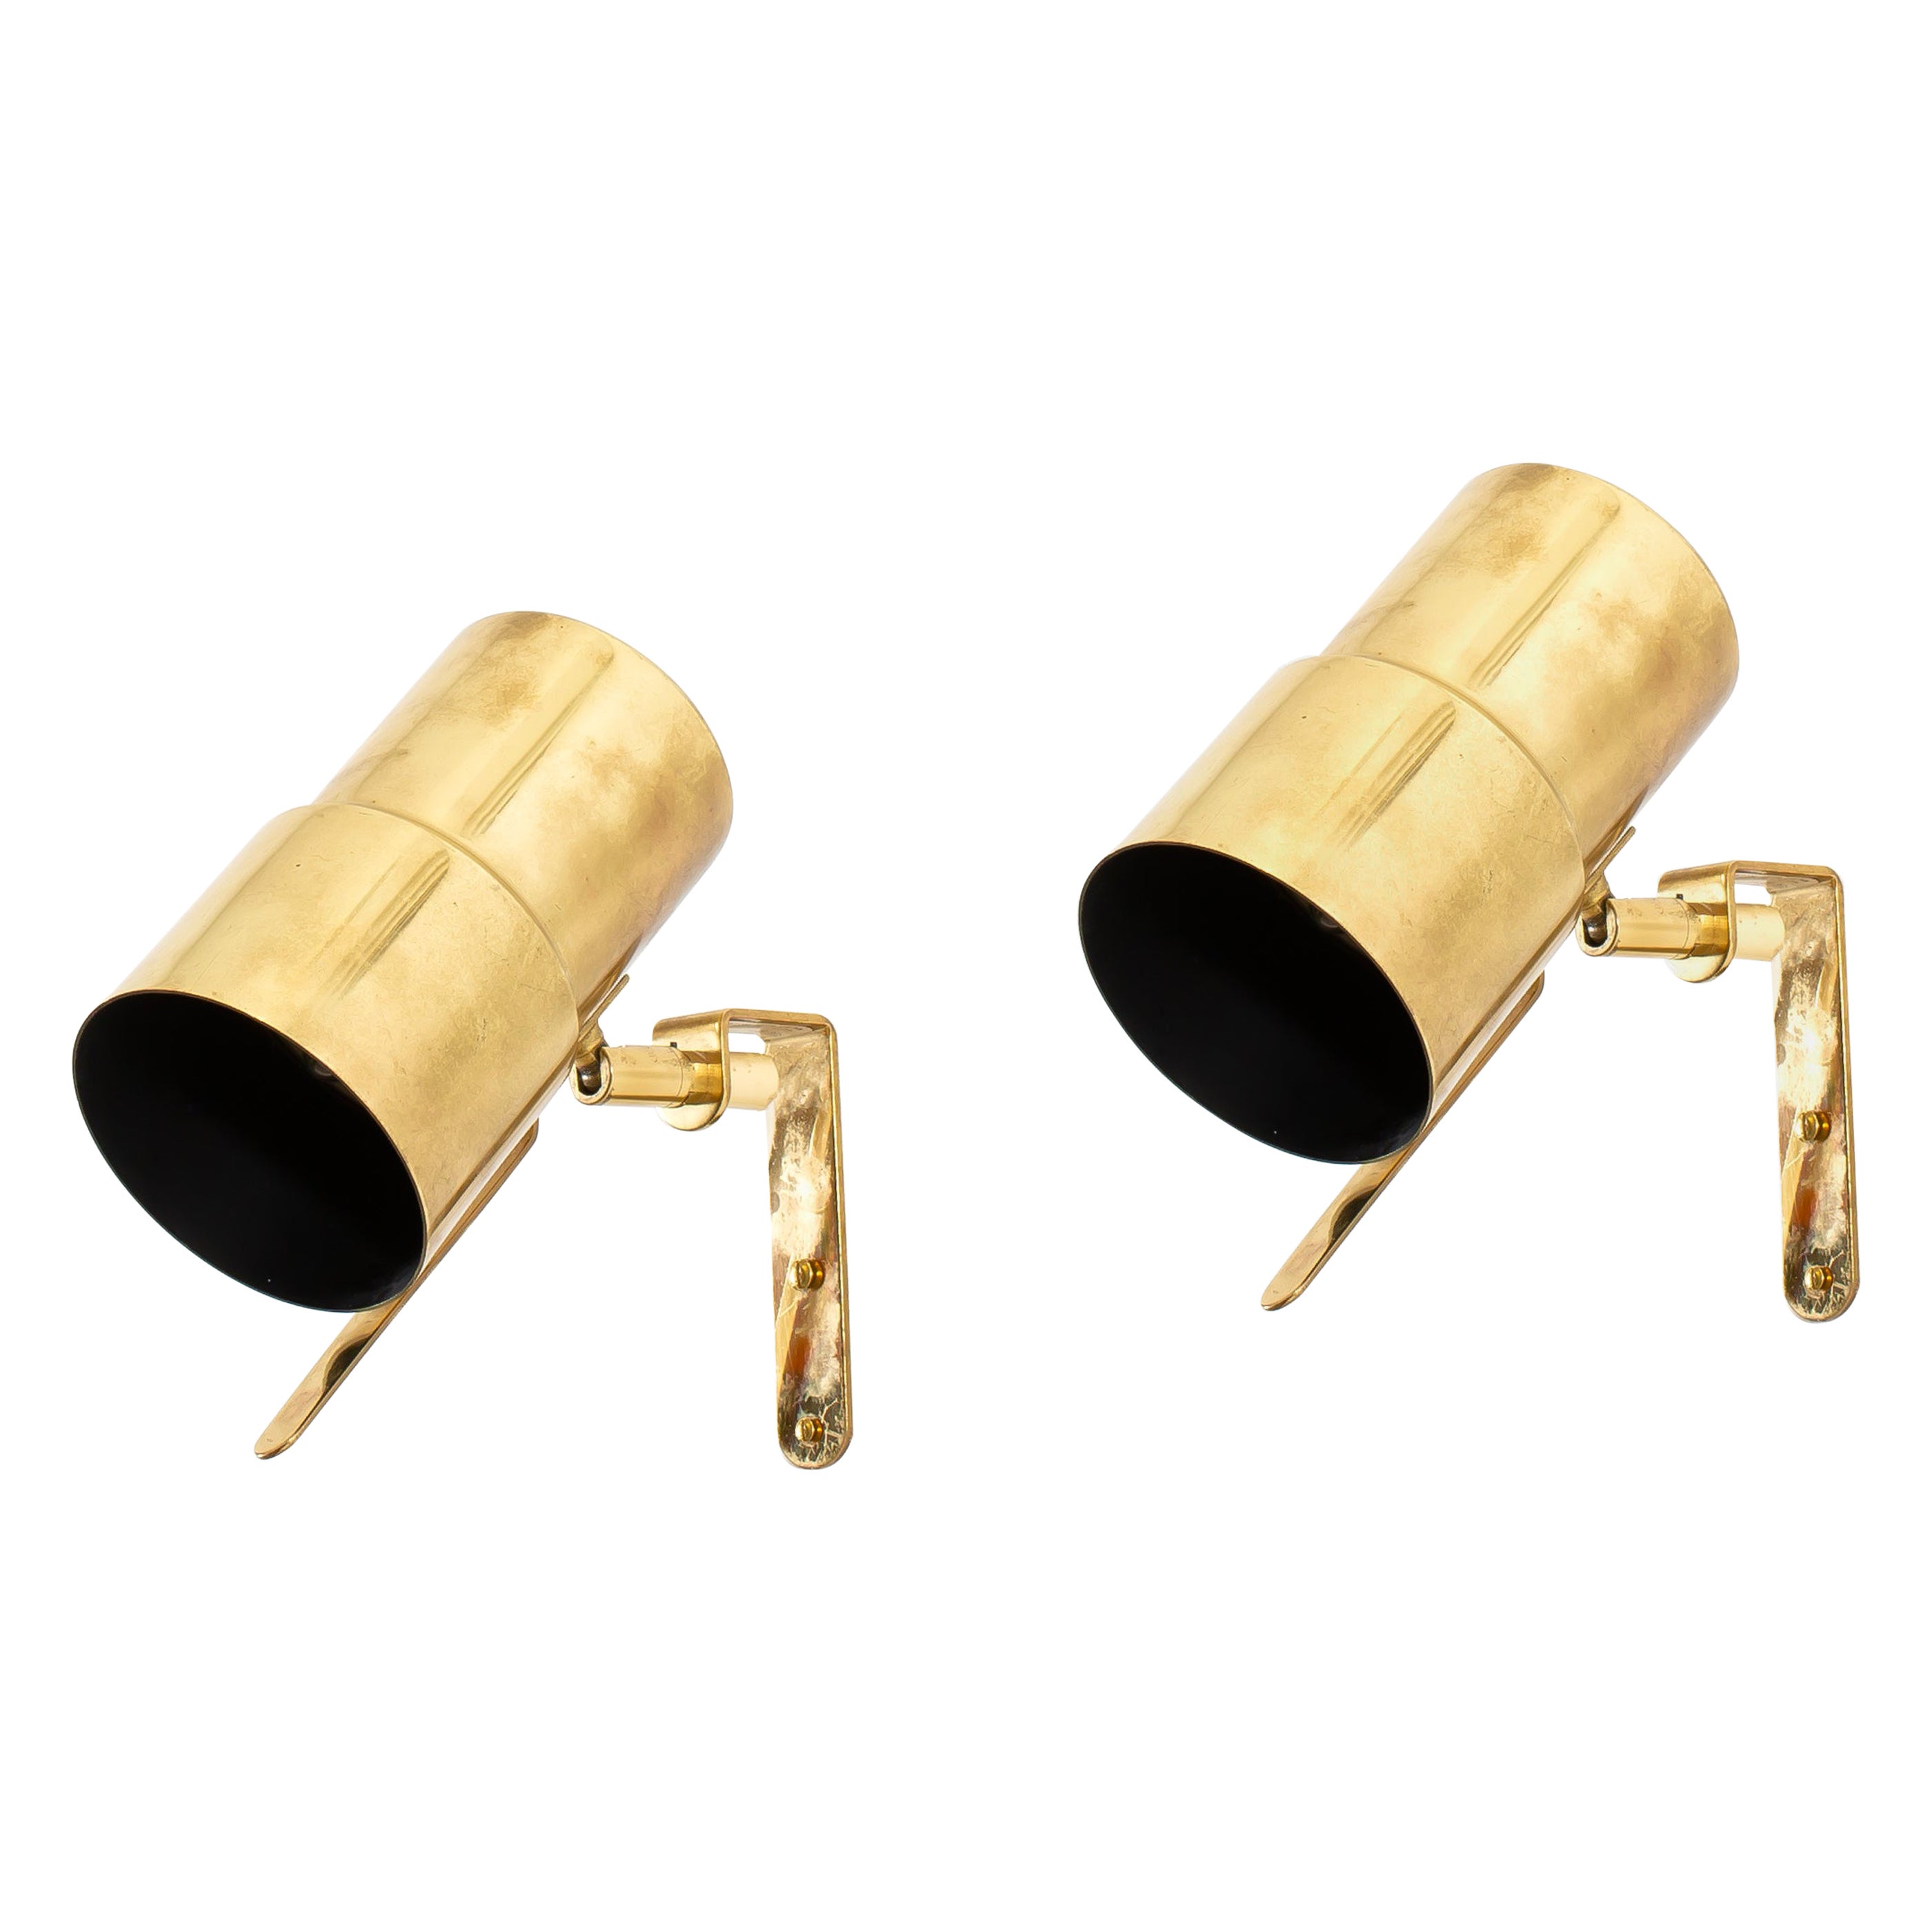 Pair of Wall Lamps in brass Model V-324 by Hans-Agne Jakobsson, Sweden, 1960s For Sale